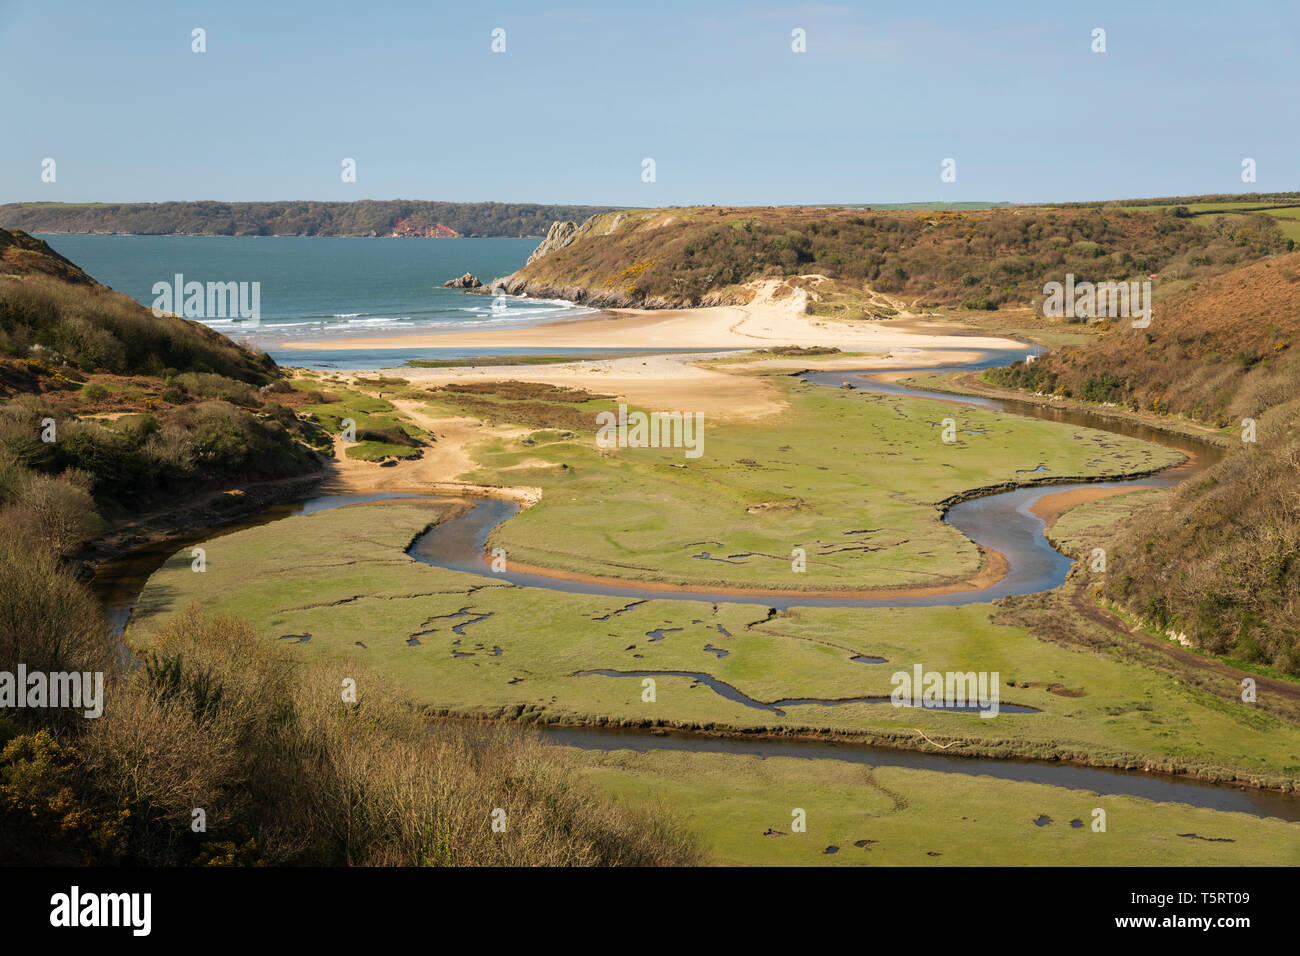 View over river valley to the Three Cliffs Bay from Pennard Castle, Gower Peninsula, Swansea, West Glamorgan, Wales, United Kingdom, Europe Stock Photo